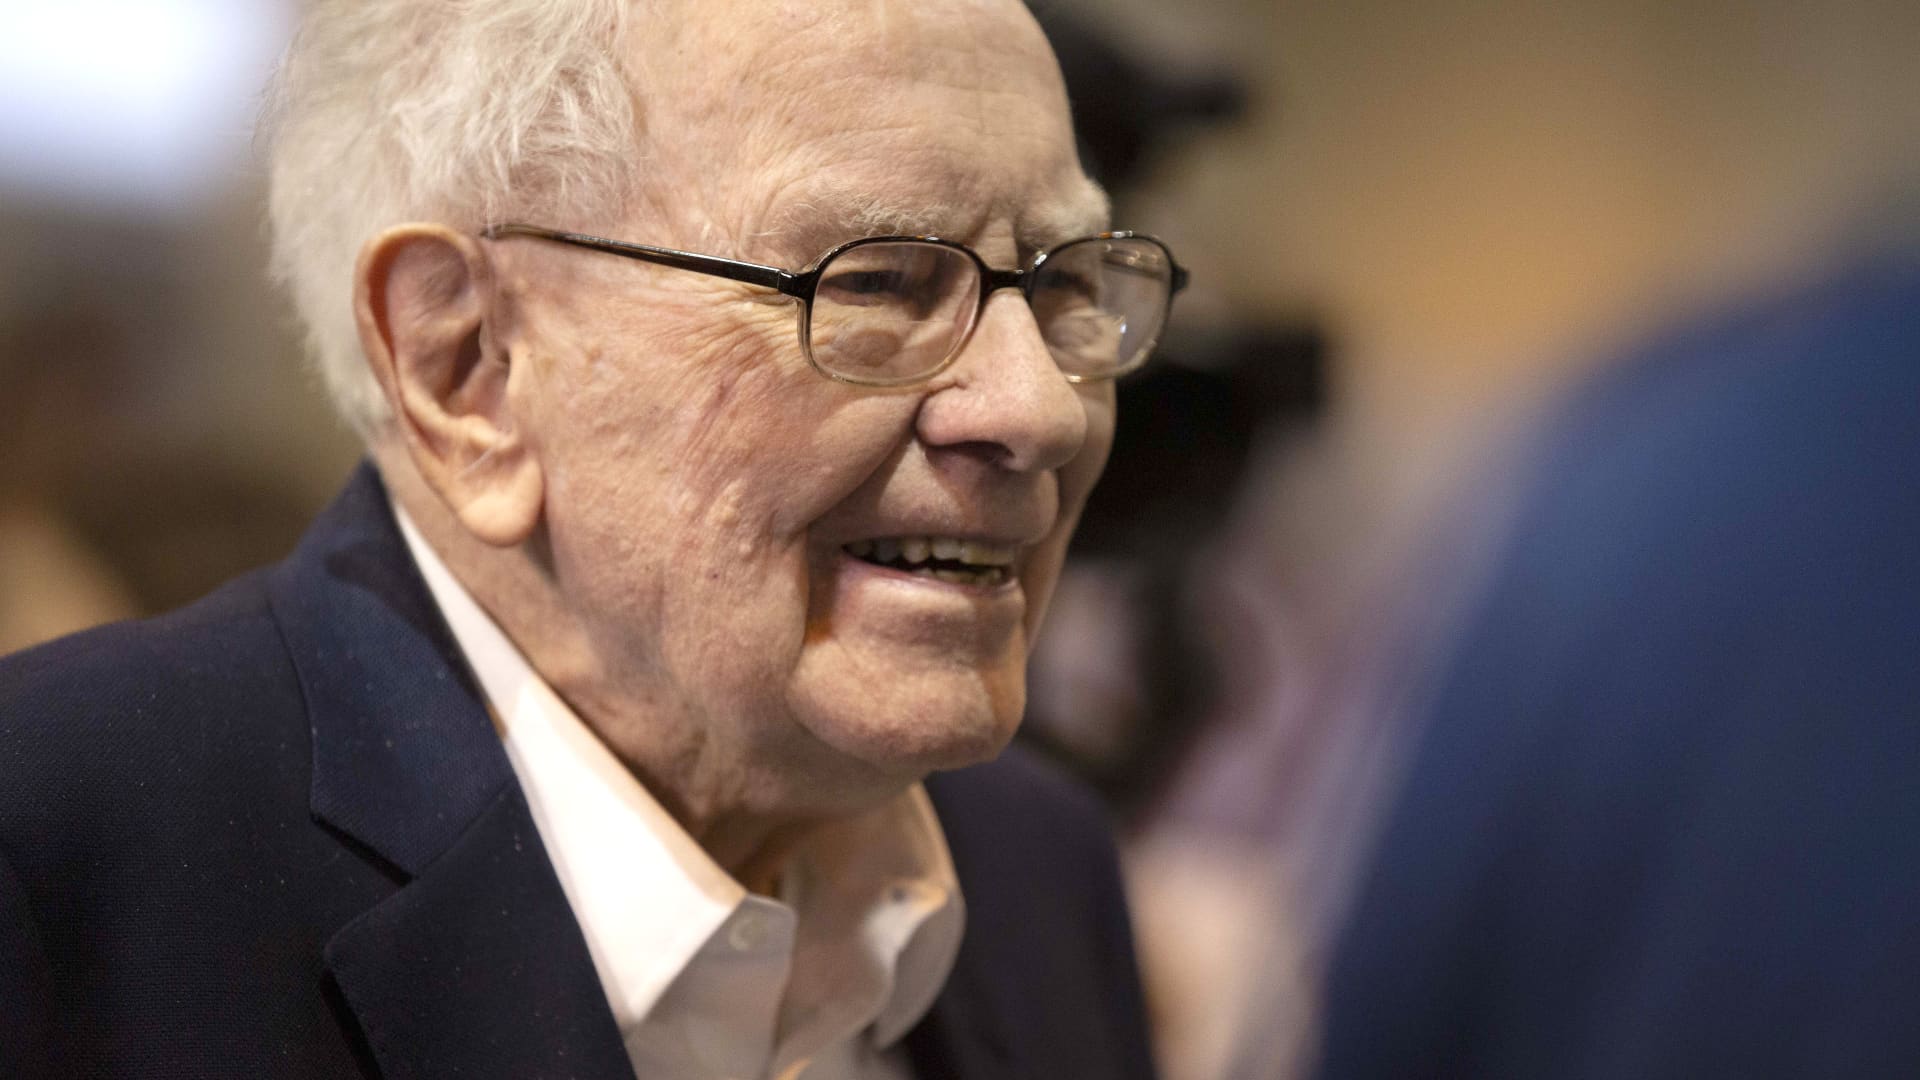 Warren Buffett’s Berkshire Hathaway made a number of changes in its equity portfolio last quarter [Video]